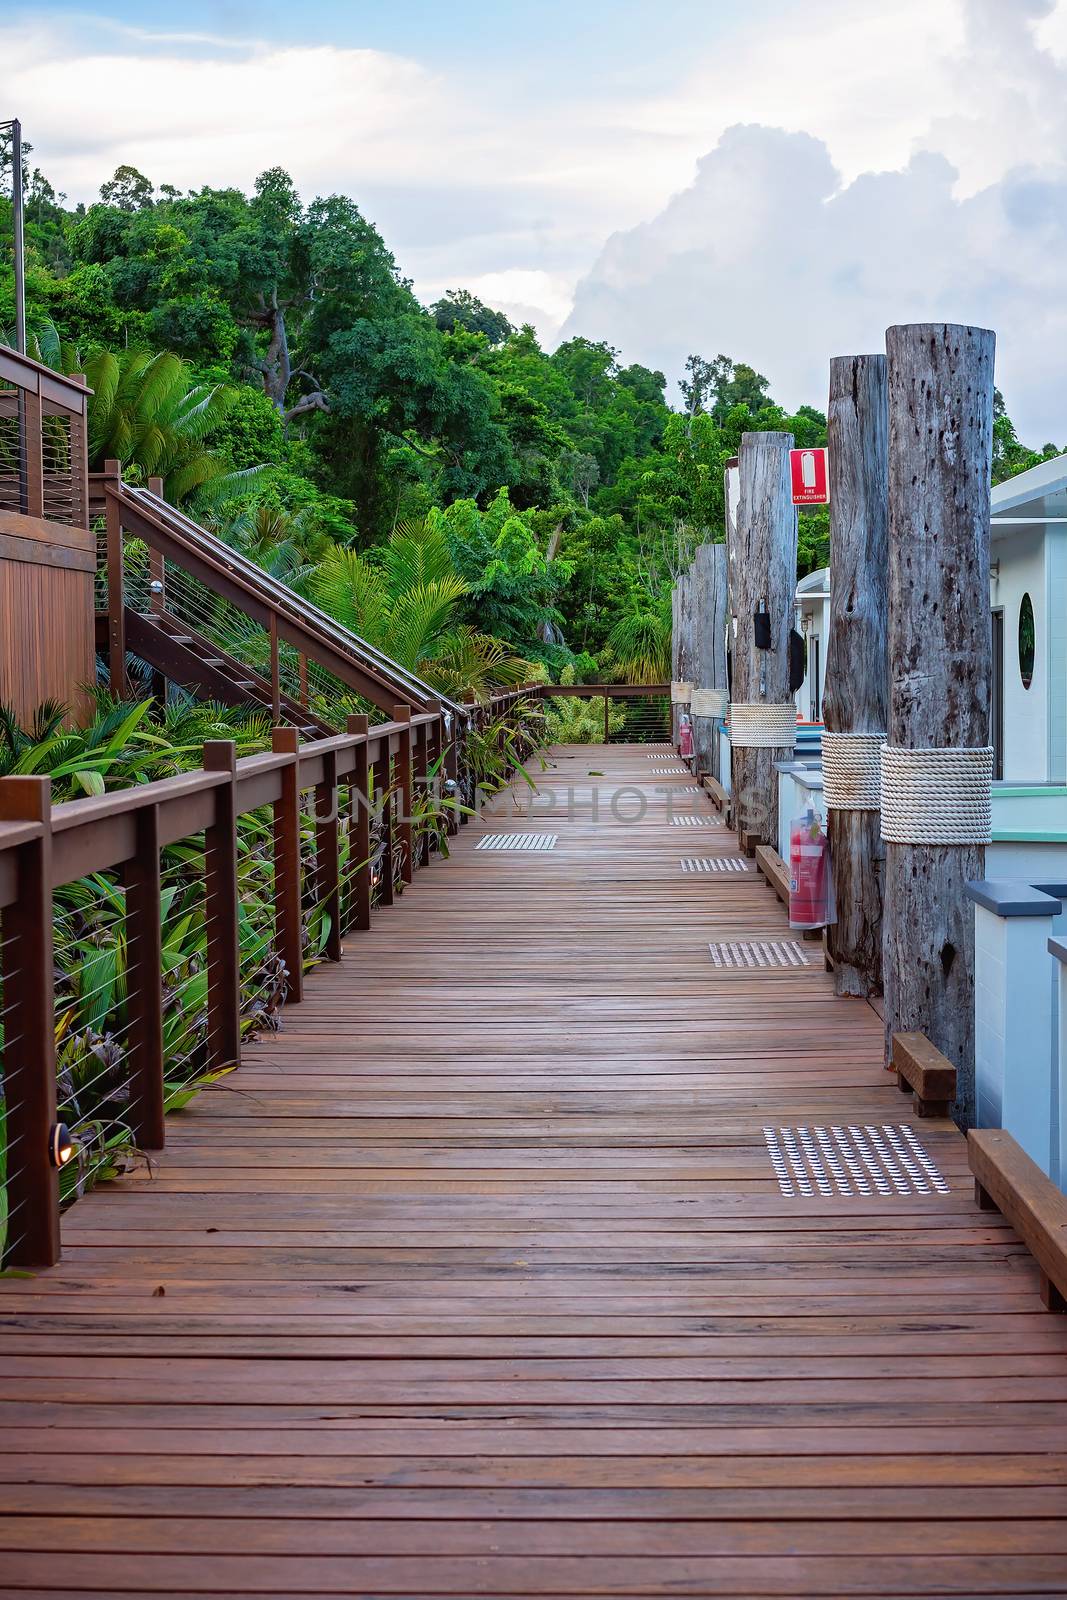 A timber boardwalk joining boat accommodation with stairs at a simulated jetty, with bushland at the end